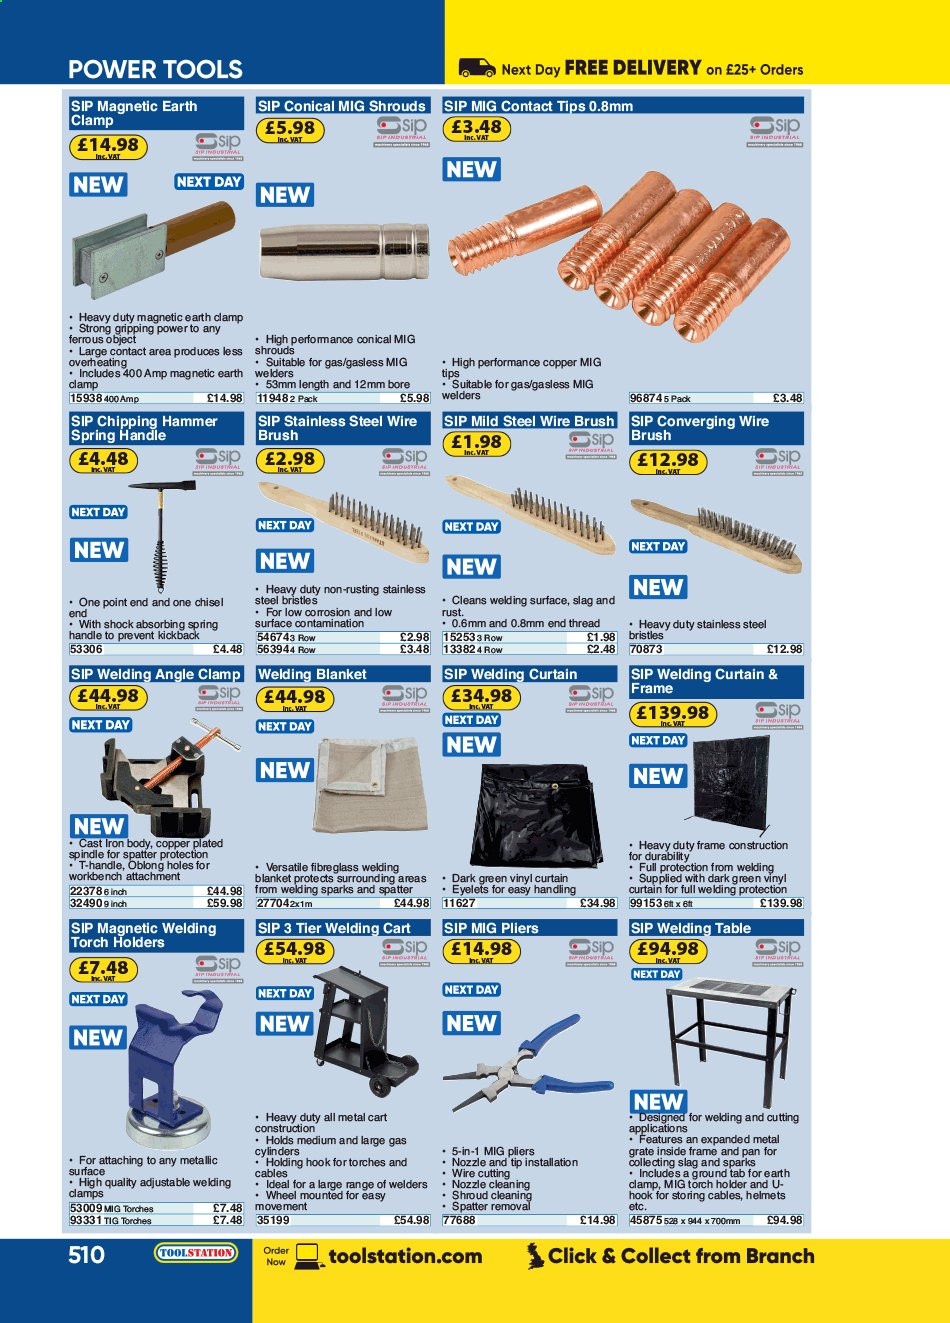 thumbnail - Toolstation offer  - Sales products - holder, brush, hammer, pliers, wire brush, blanket, torch holder, cart. Page 510.